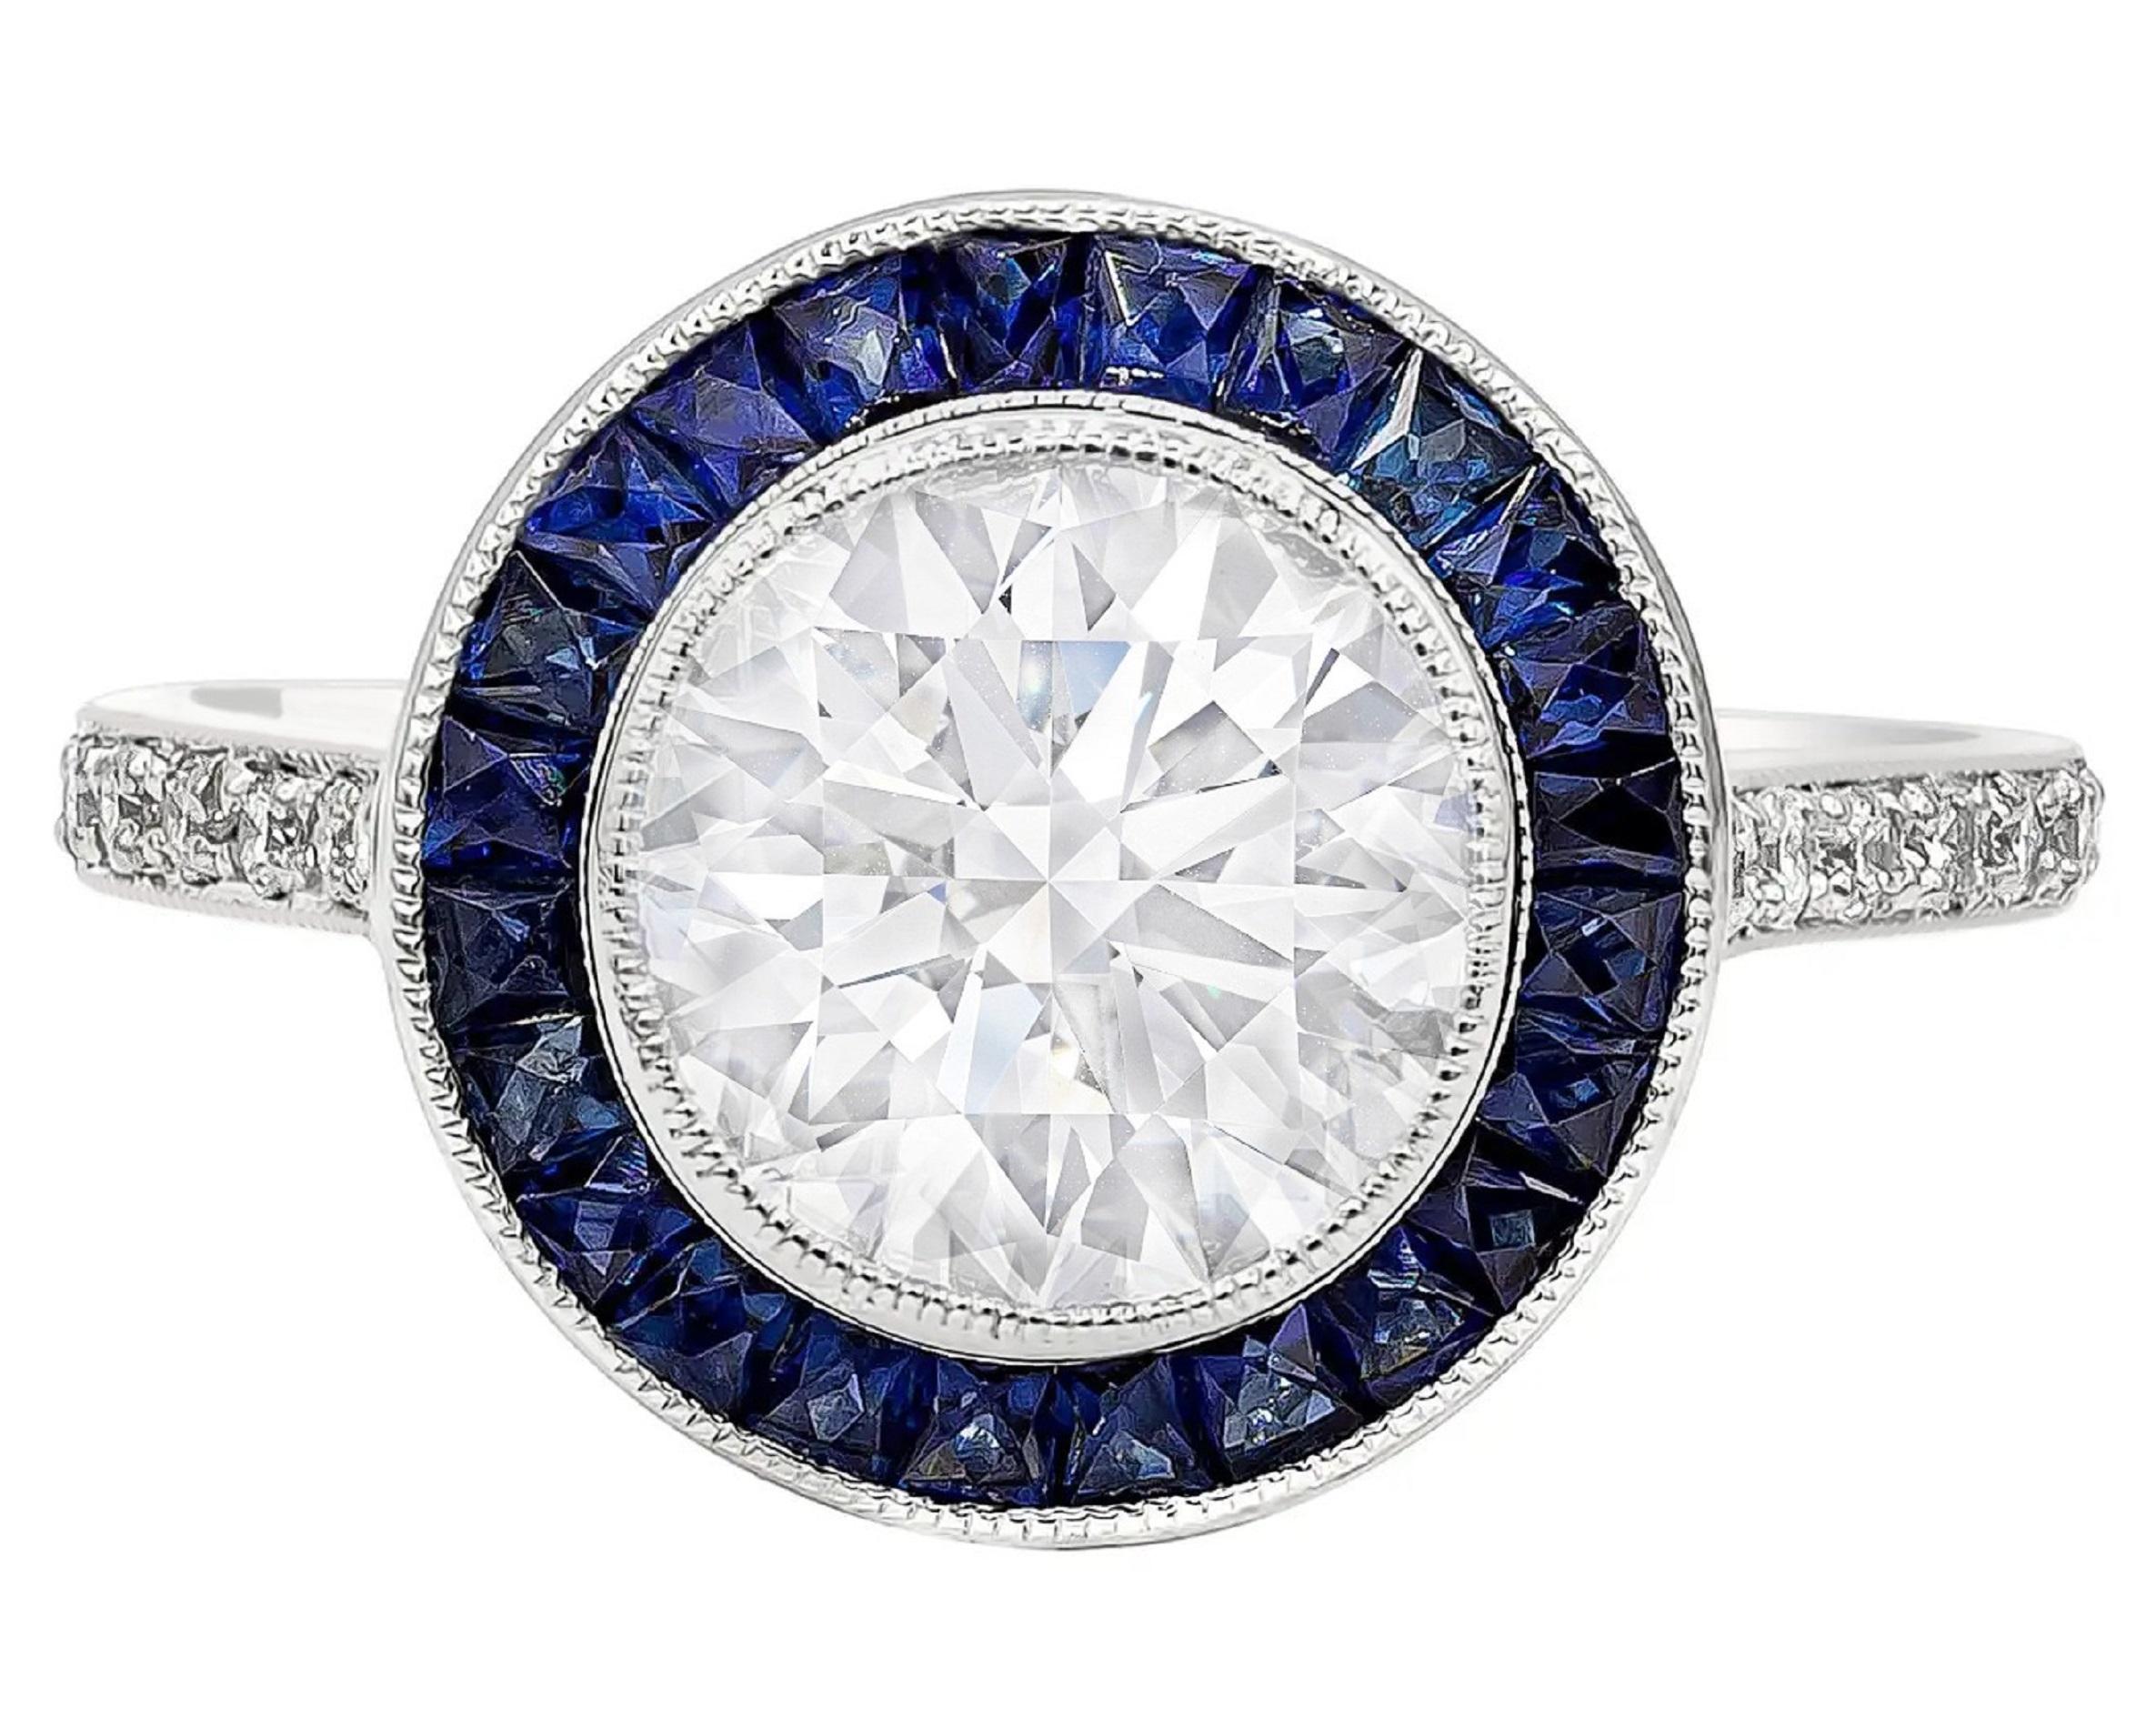 Modern Tiffany & Co. Royal Blue Sapphire Calibre Diamond Solitaire Engagement Ring For Sale